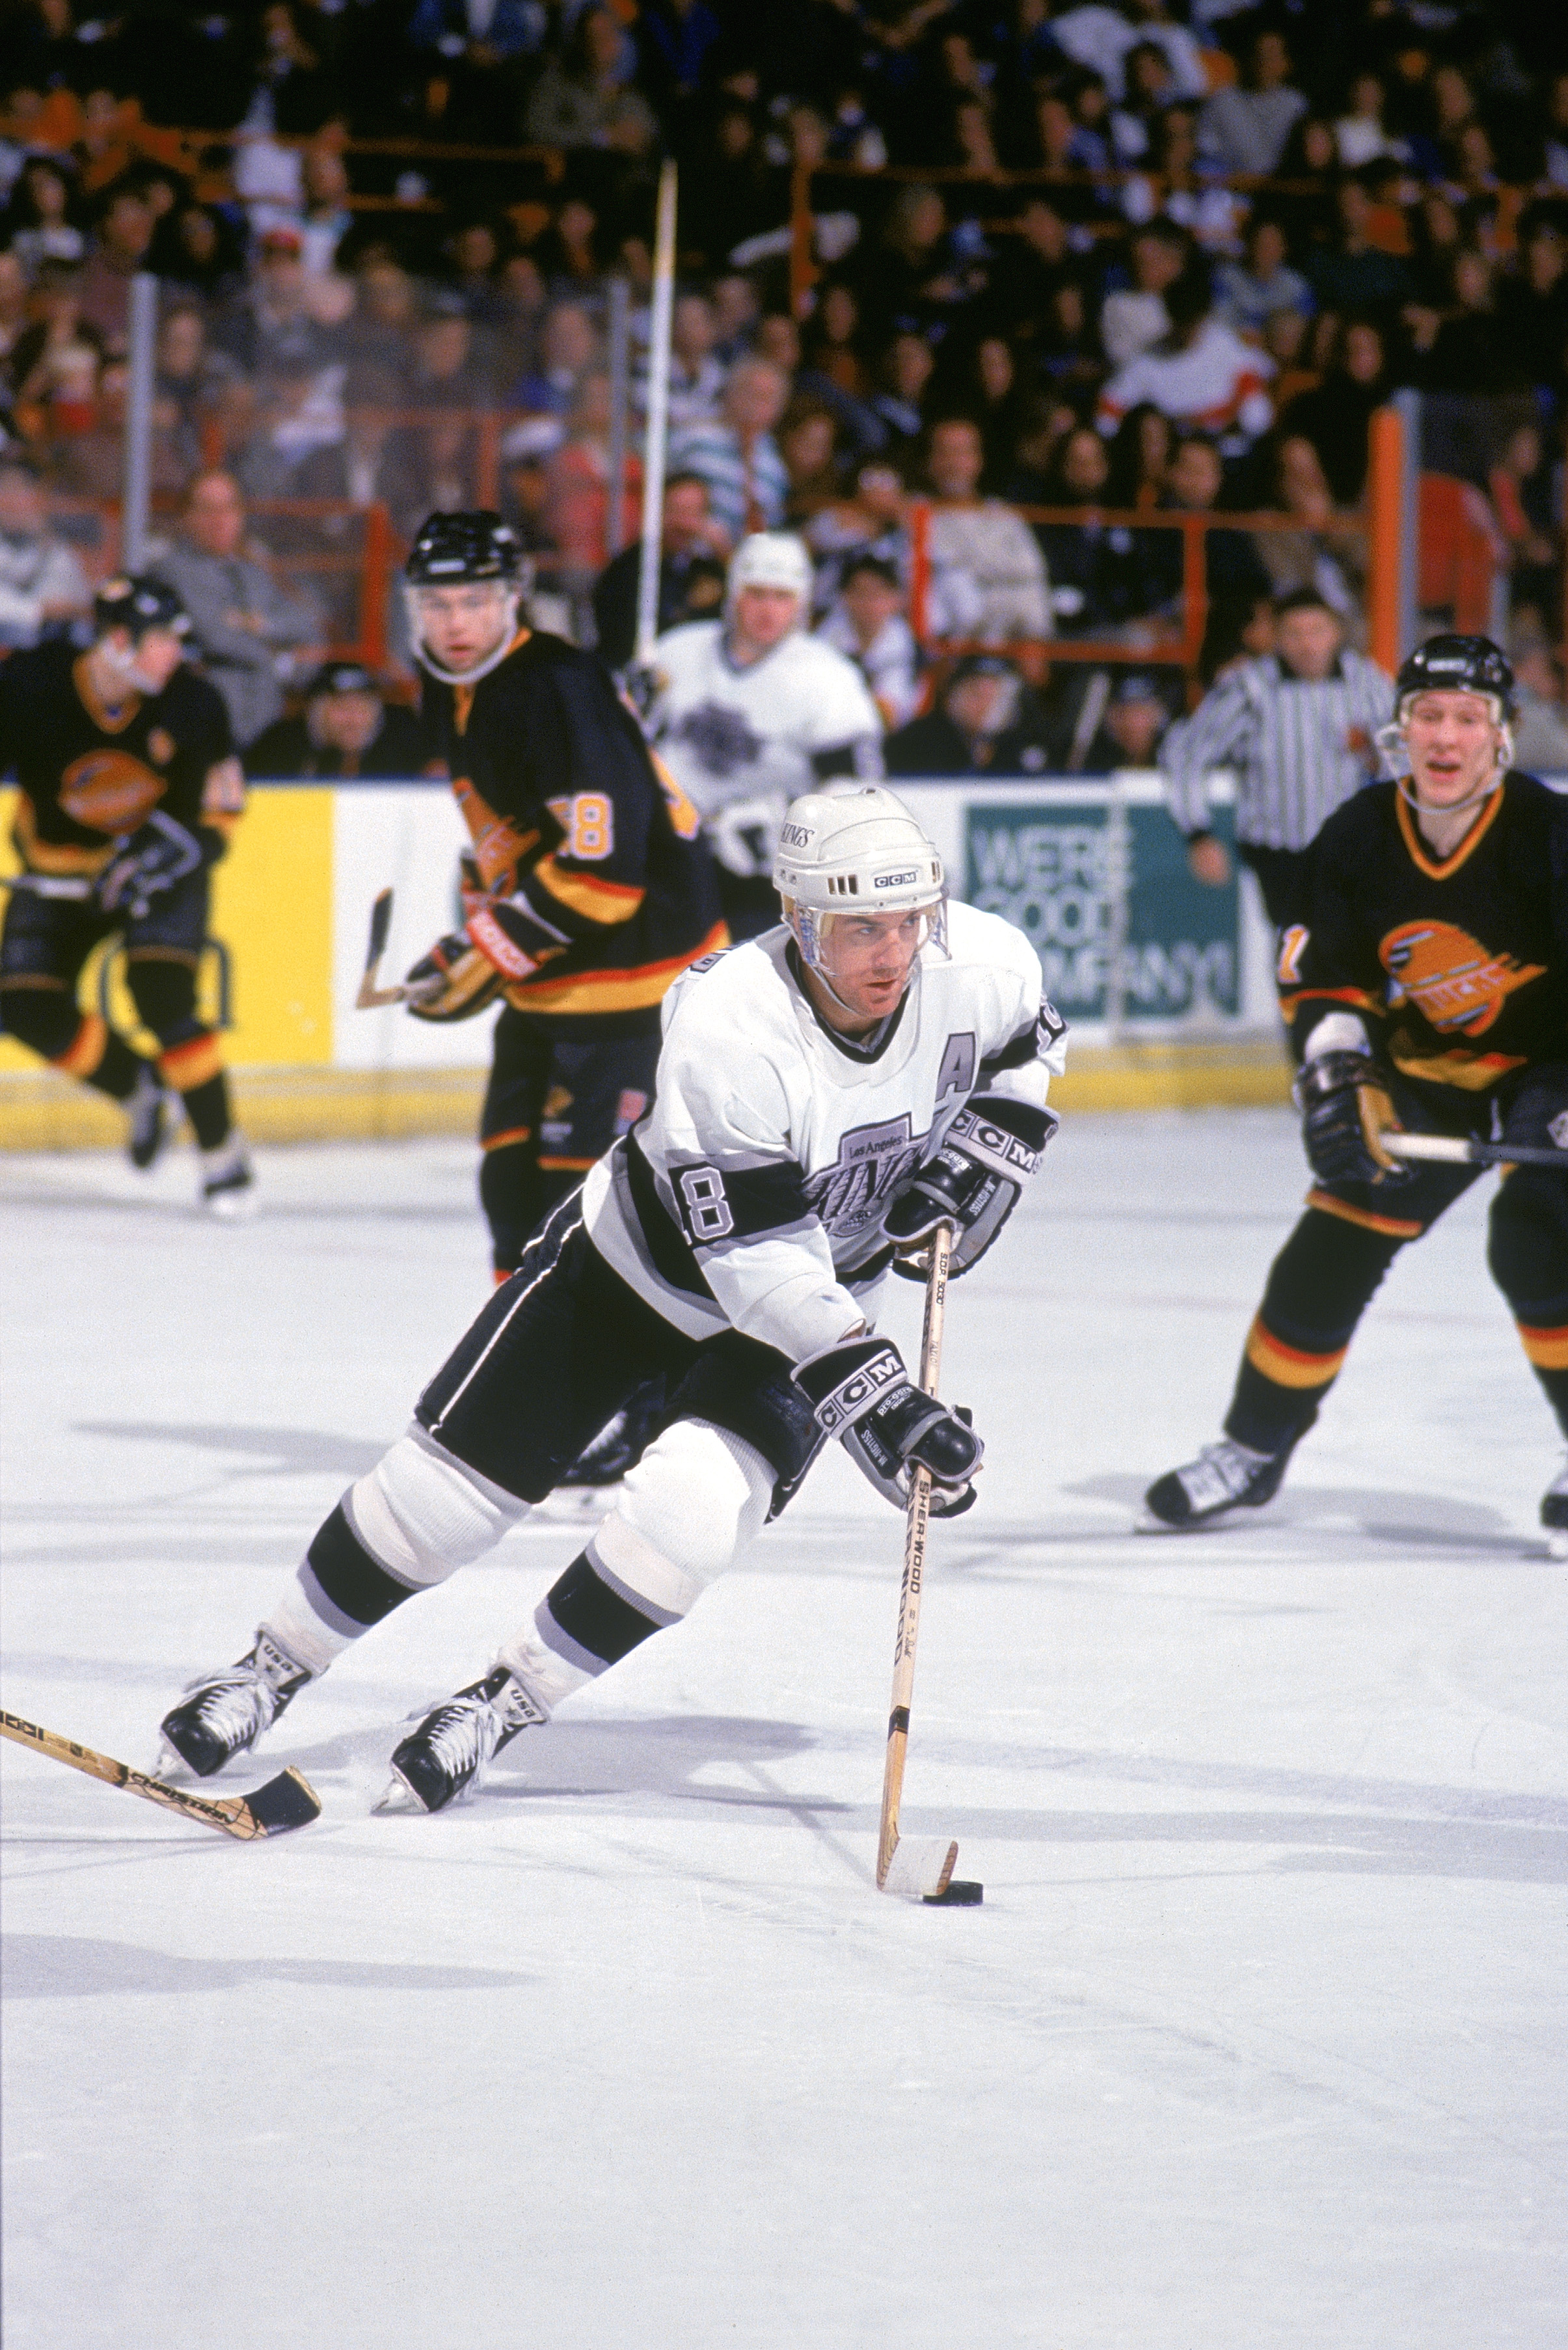 INGLEWOOD, CA - 1990:  Forward Dave Taylor #18 of the Los Angeles Kings skates with the puck against the Vancouver Canucks during the 1990-91 season at the Great Western Forum in Inglewood, California.  (Photo by Ken Levine/Getty Images)